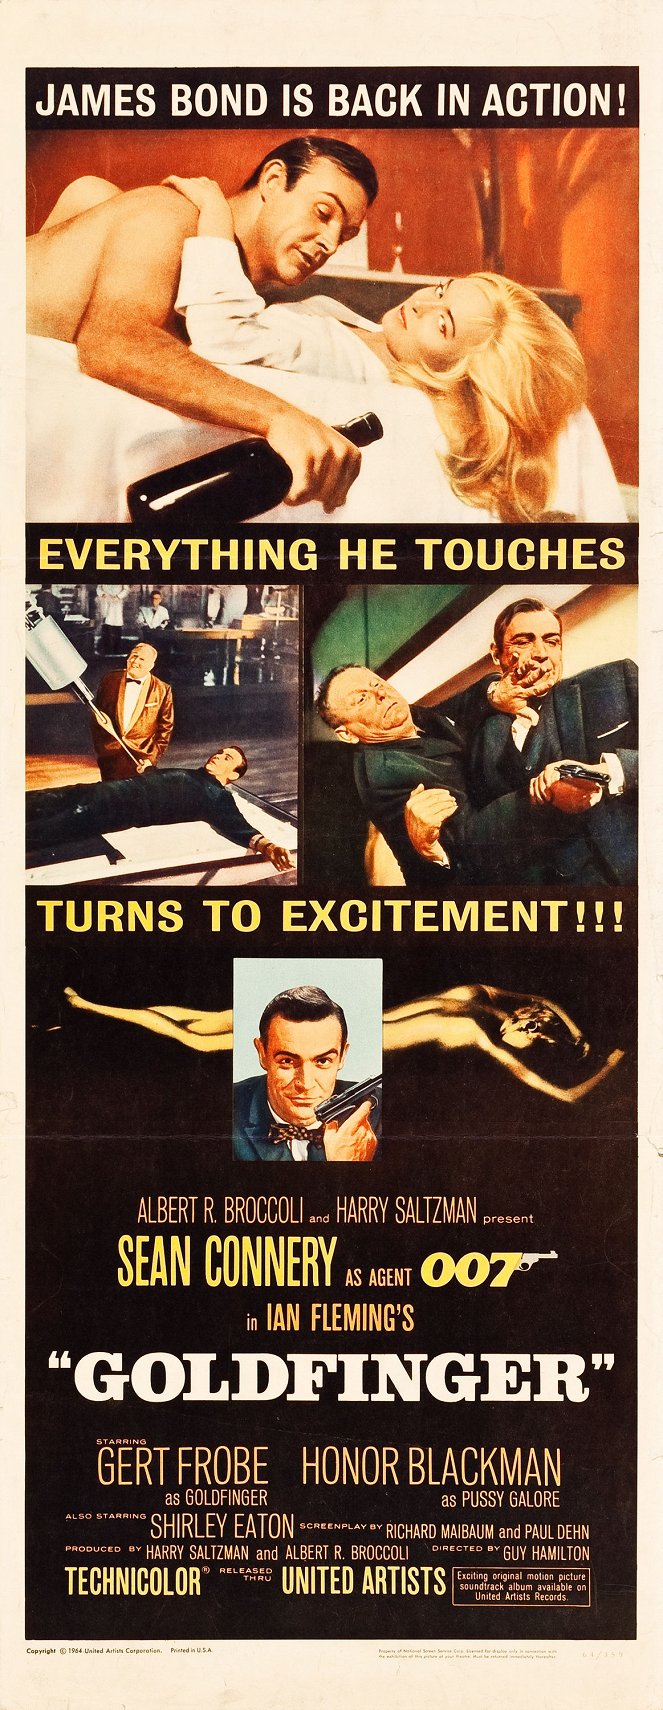 Goldfinger - Posters